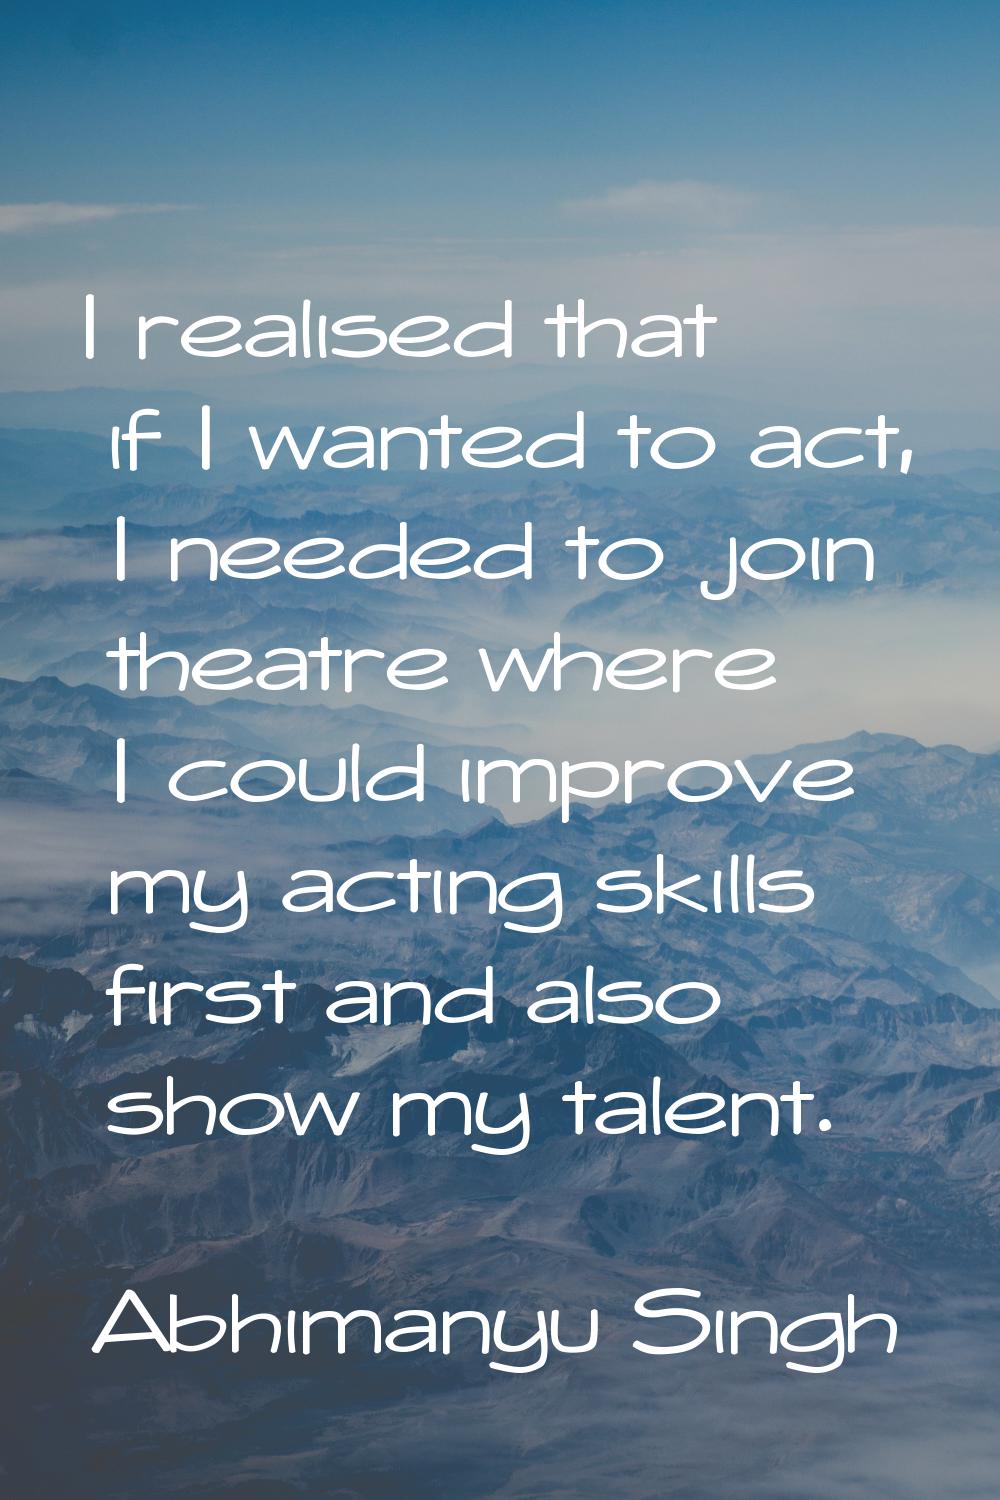 I realised that if I wanted to act, I needed to join theatre where I could improve my acting skills